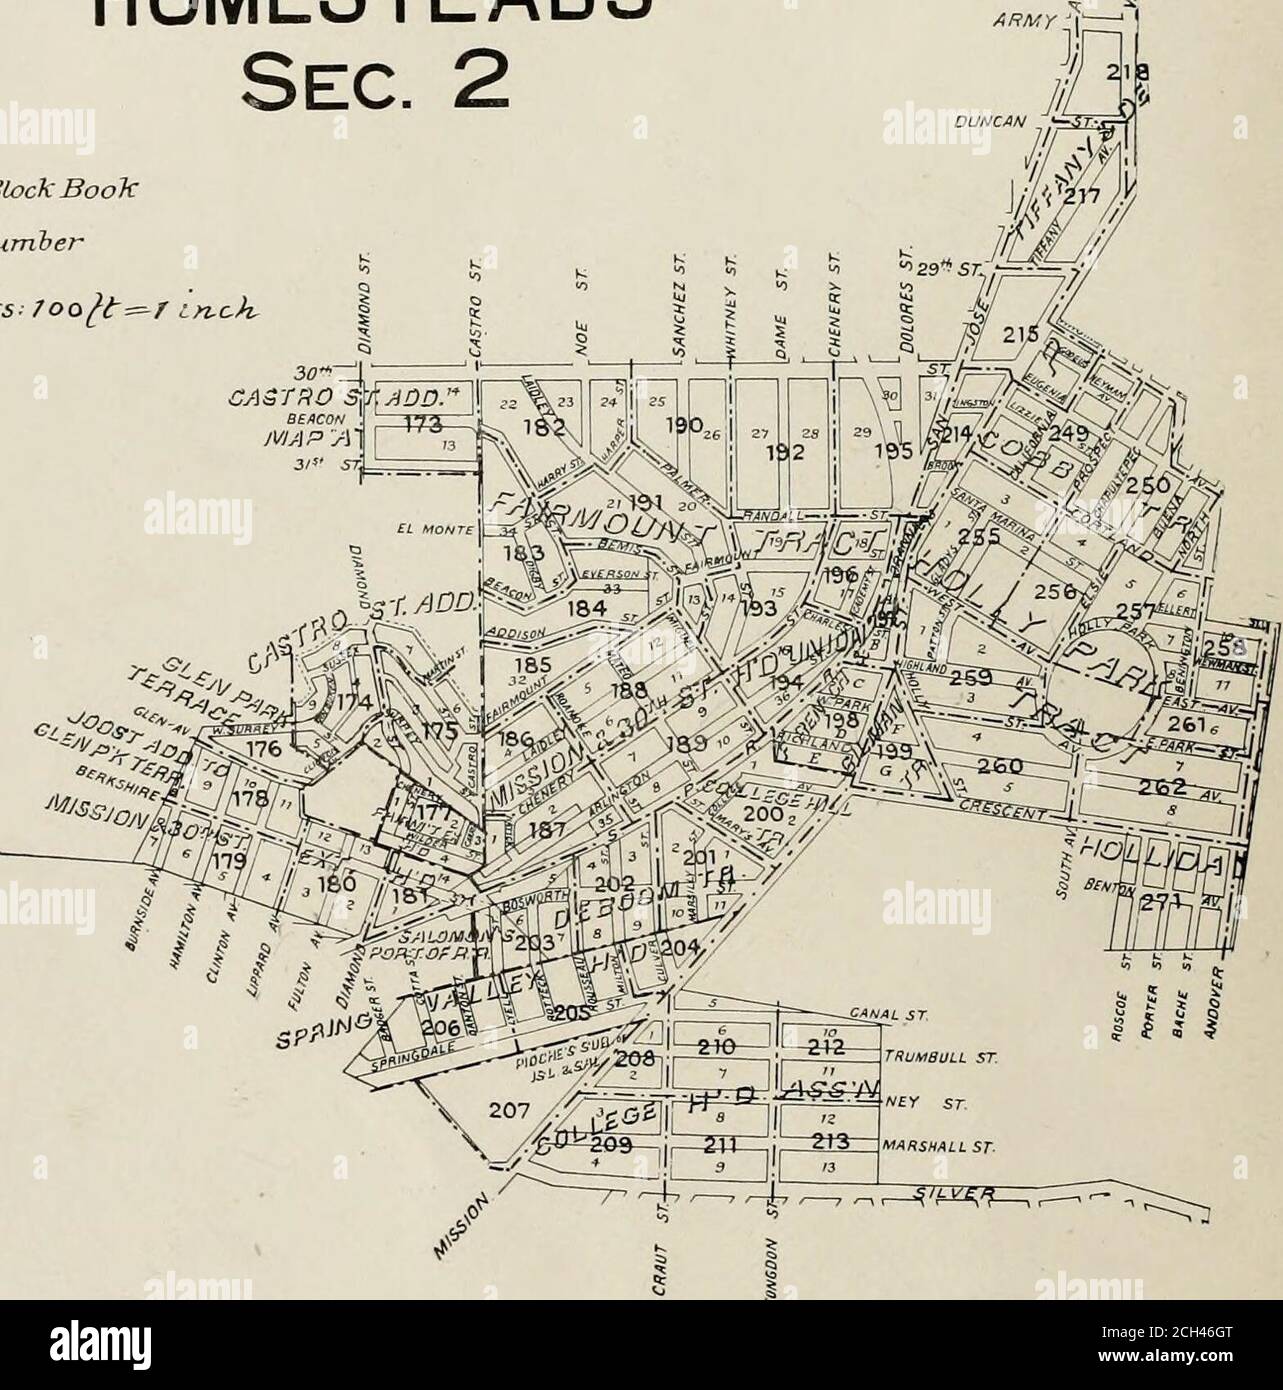 . The San Francisco block book. comprising Park Lane Tract, Market Street Homestead Ass'n., Stanford Heights, Sunnyside, City Land Ass'n., Lakeview, West End Homestead, University Mound Homestead Ass'n., Excelsior Homestead, Reis Tract, South San Francisco Homestead and Railroad Ass'n., Tide Lands, etc. : showing size of lots and blocks and names of owners, compiled from latest official records . SAX FRAXCISCO HOMESTEADS INDEX MAP TO BLOCK BOOK or HOMESTEADSSec. 2 jjTli Page of Block BookI I Block Numher Scale ioBloc/ts- 7oo^^=^/ i&gt;T,ch. SAN FRANCISCO HOMESTEADS Stock Photo